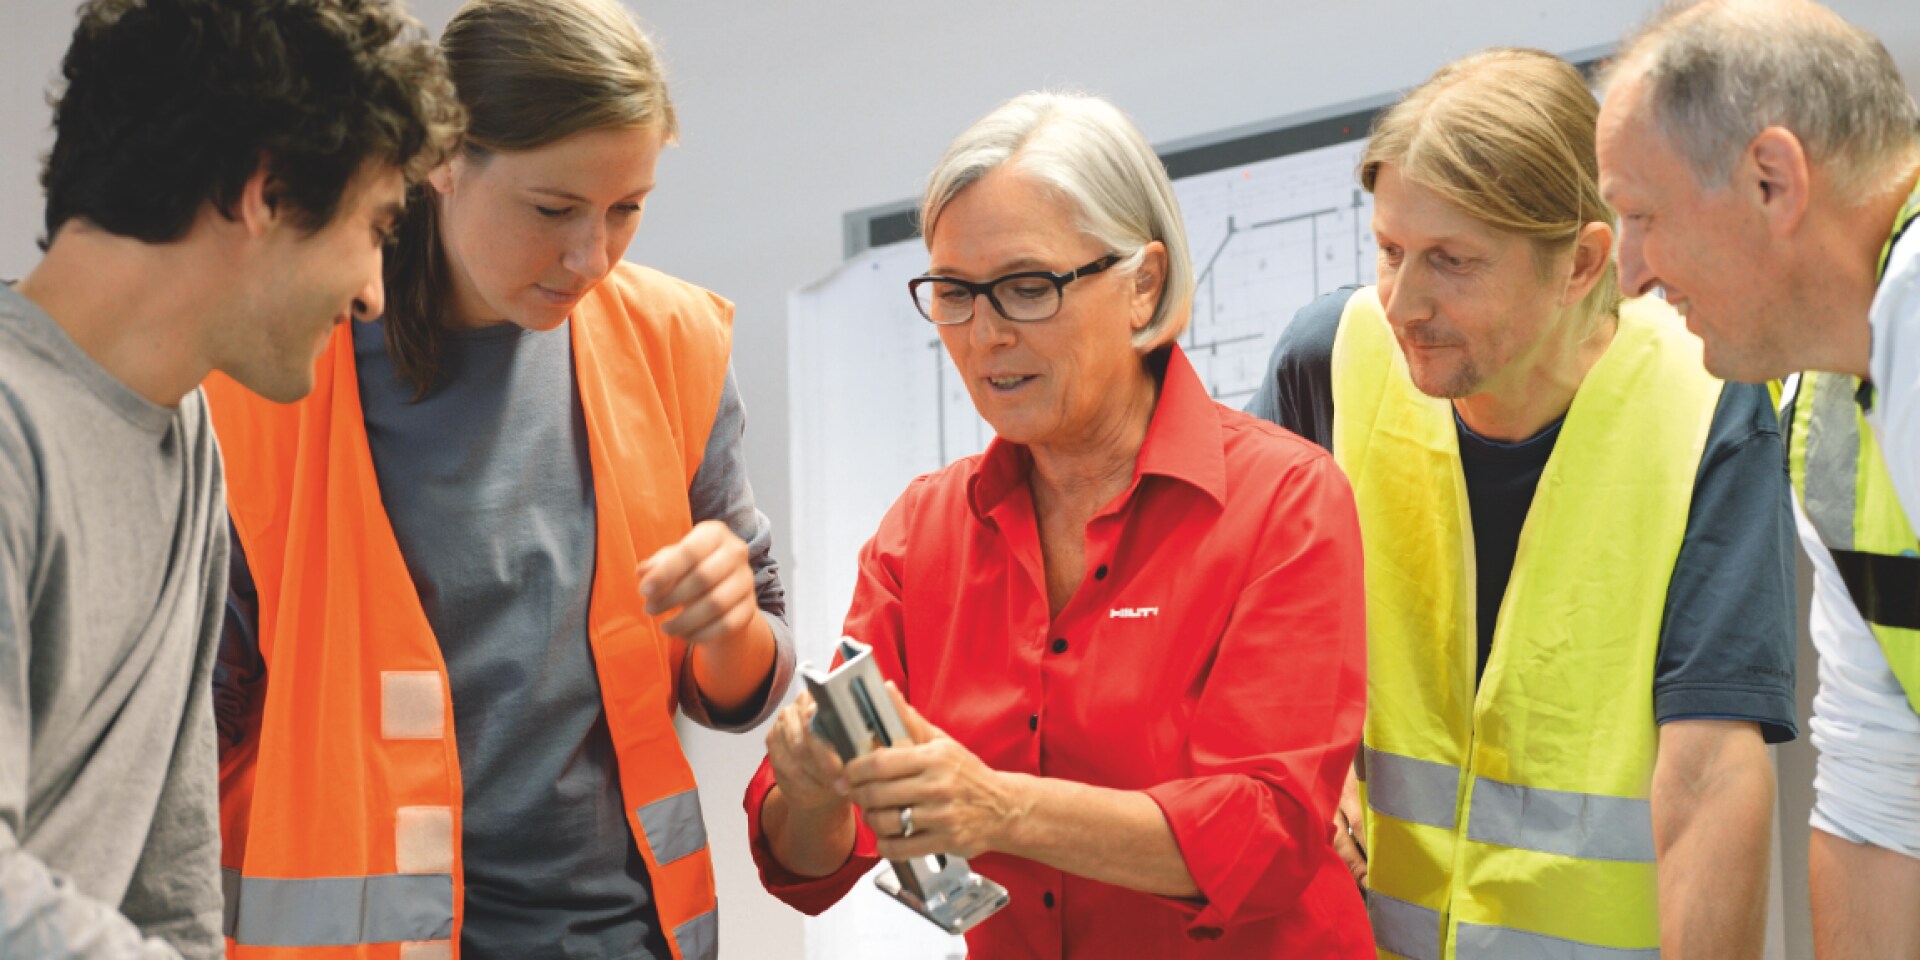 Hilti installers training for modular support systems